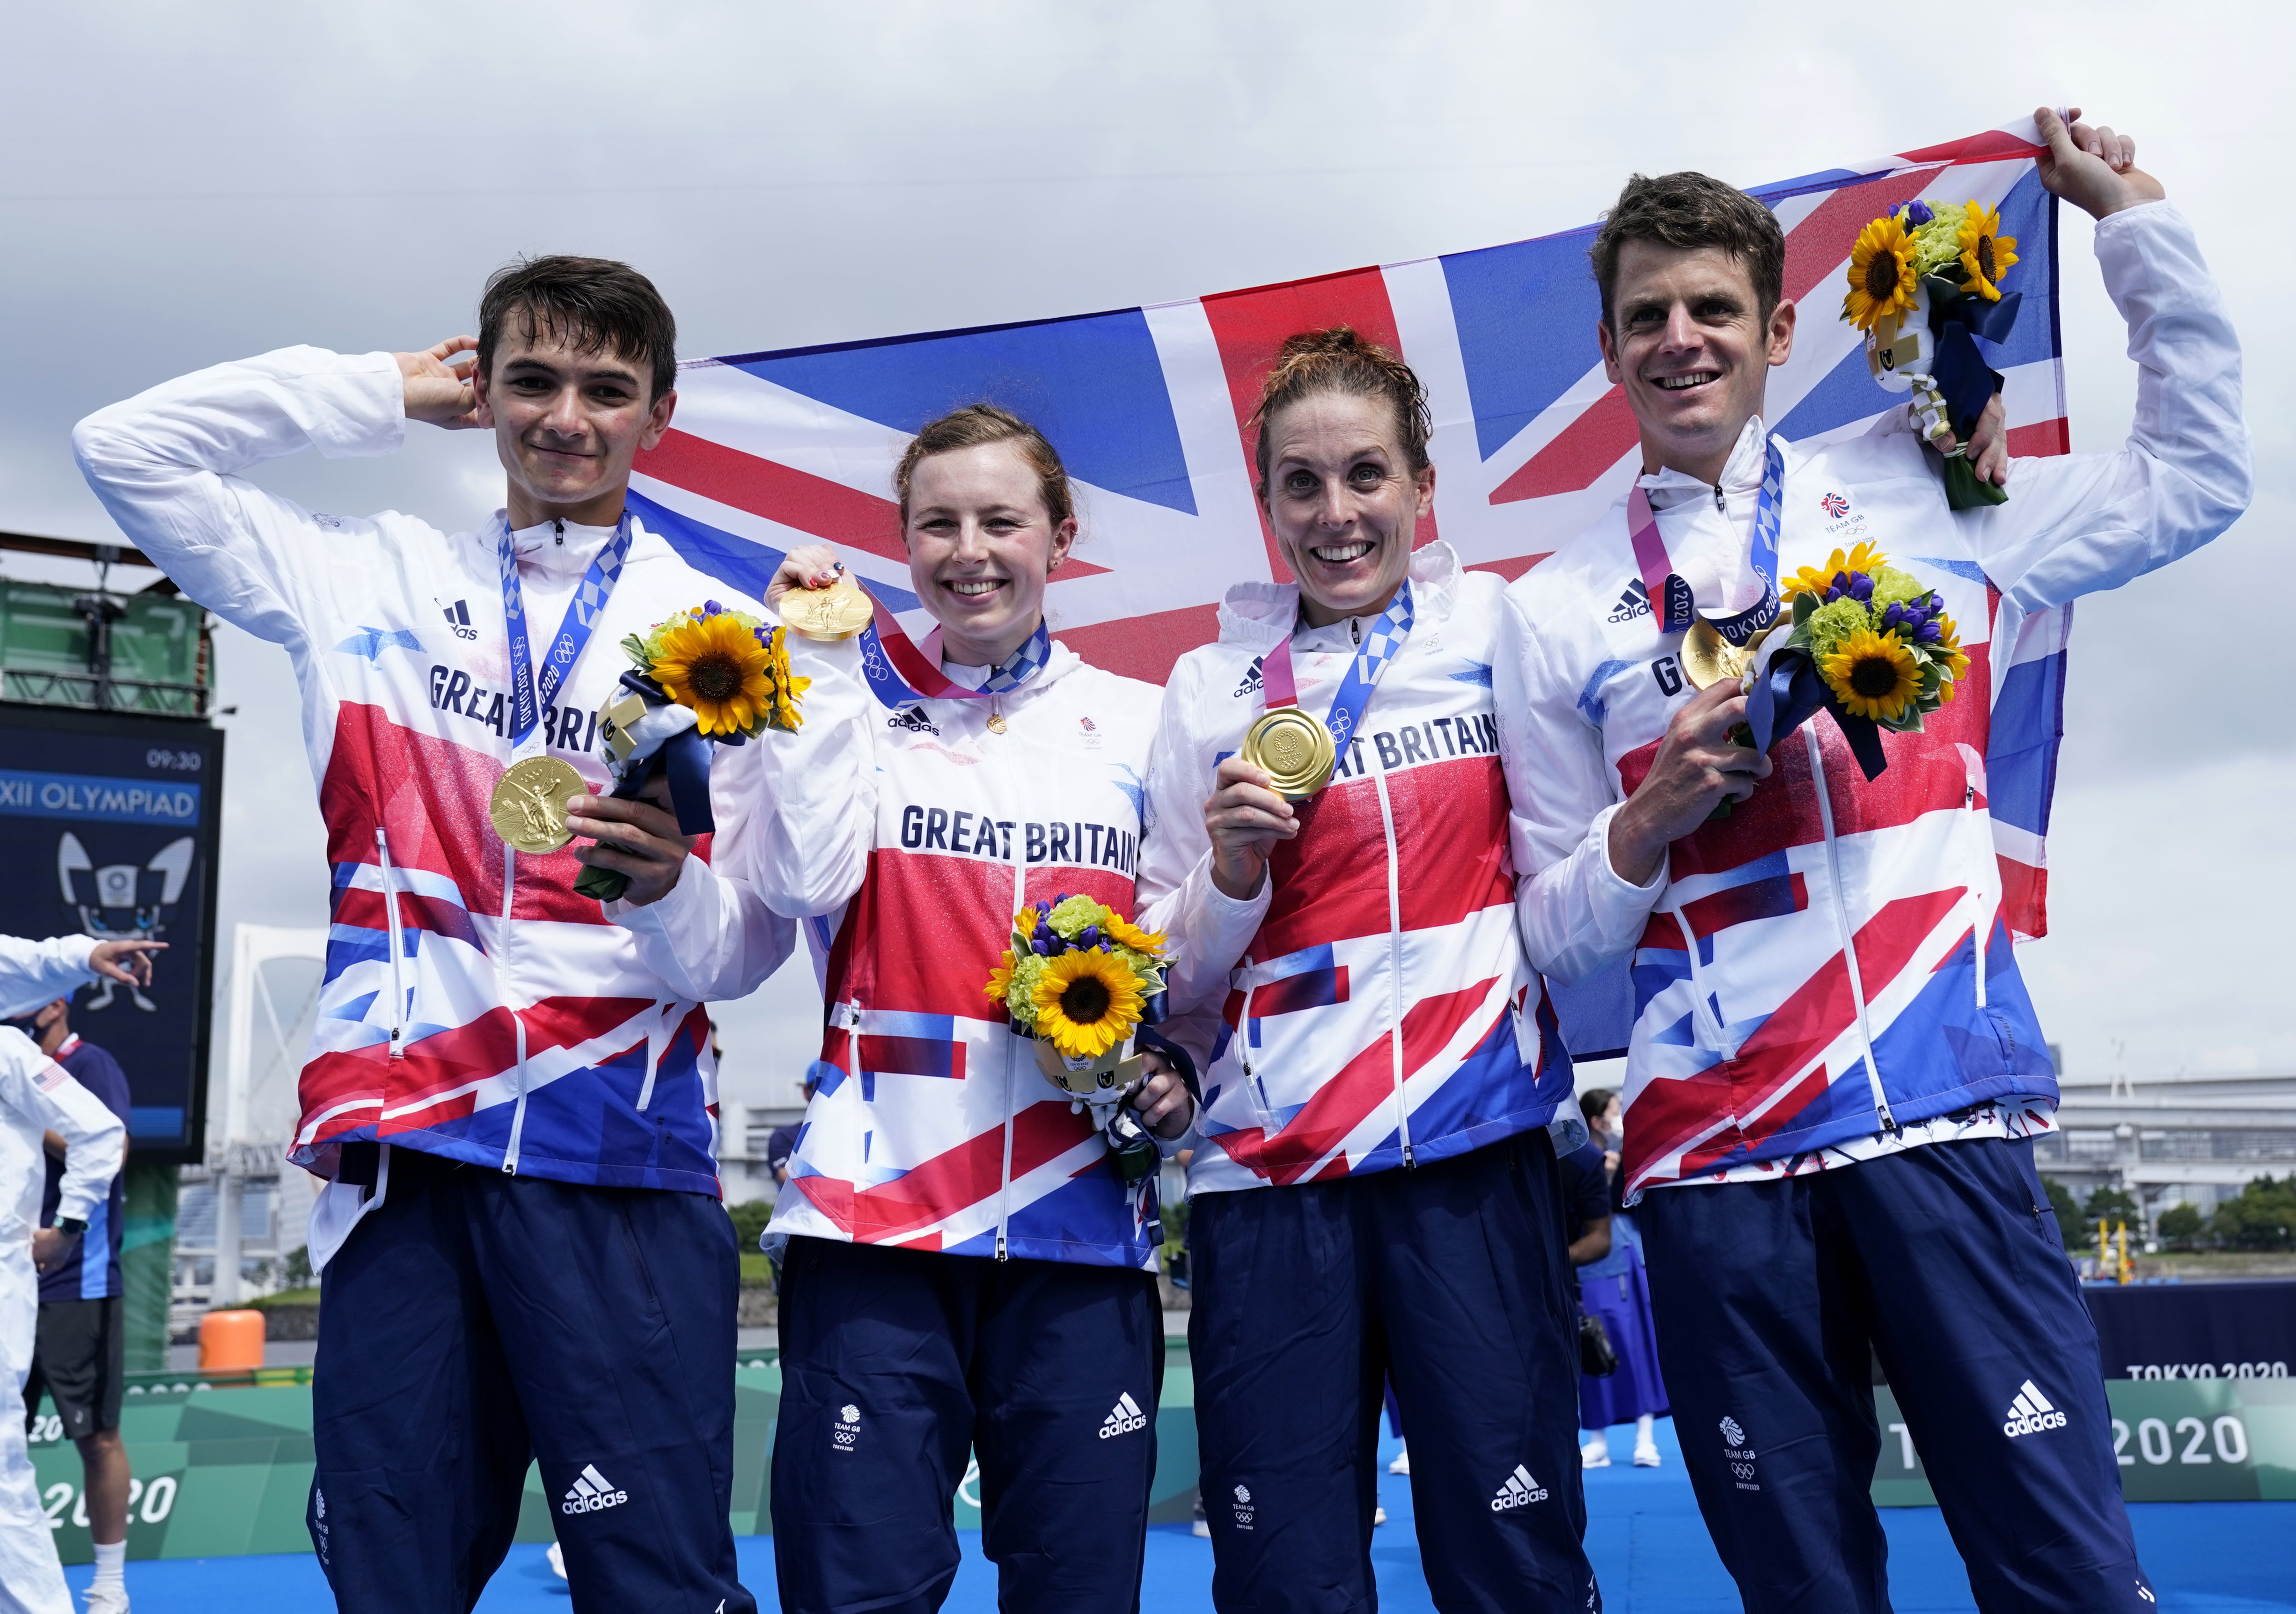 Alex Yee, Georgia Taylor-Brown, Jessica Learmonth and Jonny Brownlee cheer their victory